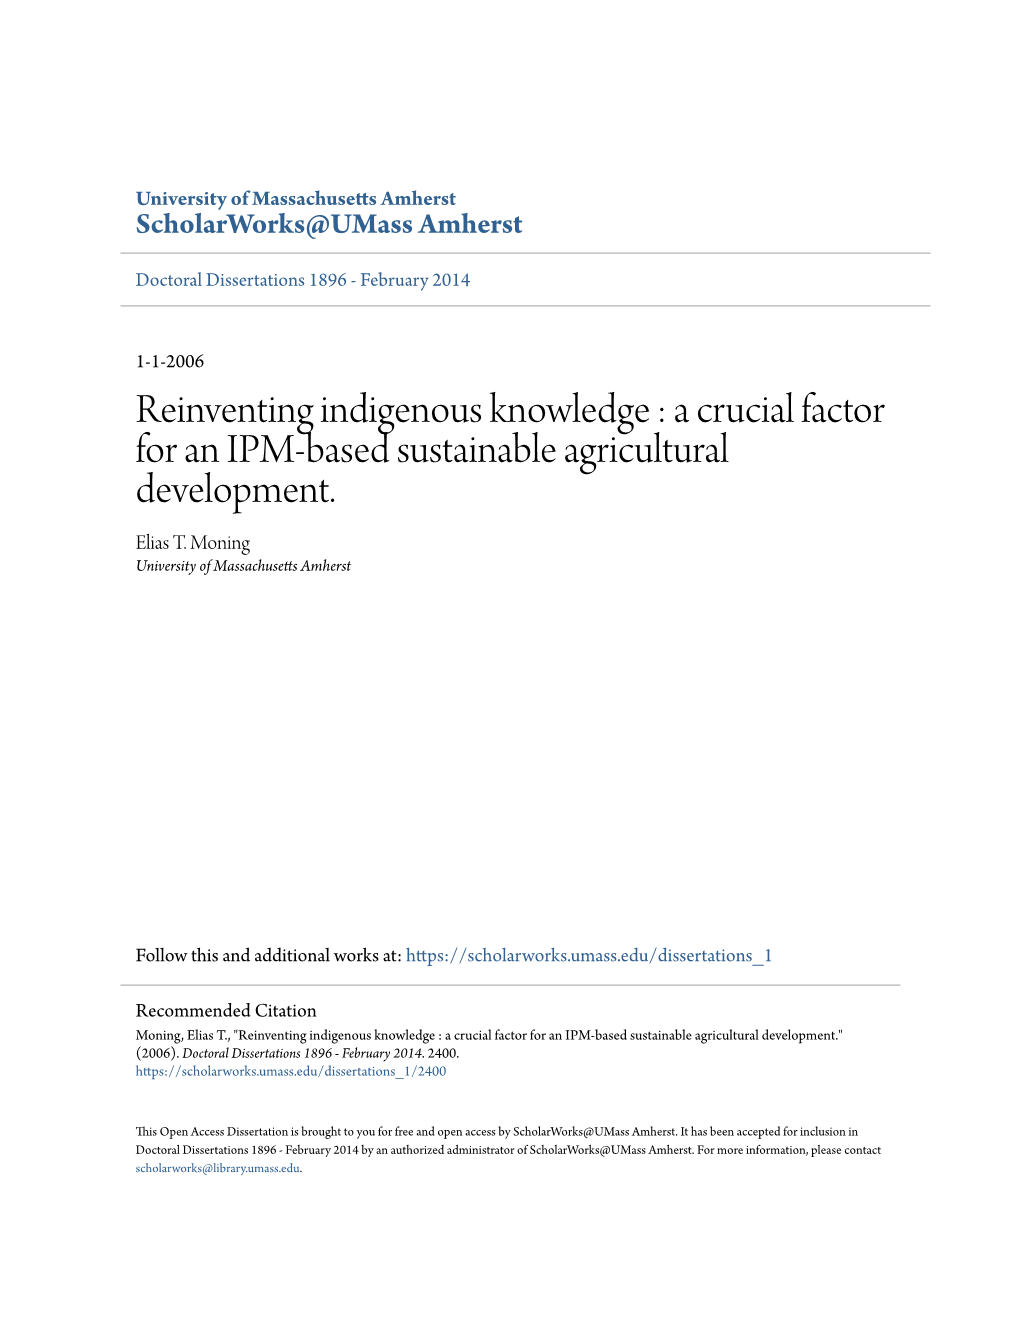 Reinventing Indigenous Knowledge : a Crucial Factor for an IPM-Based Sustainable Agricultural Development